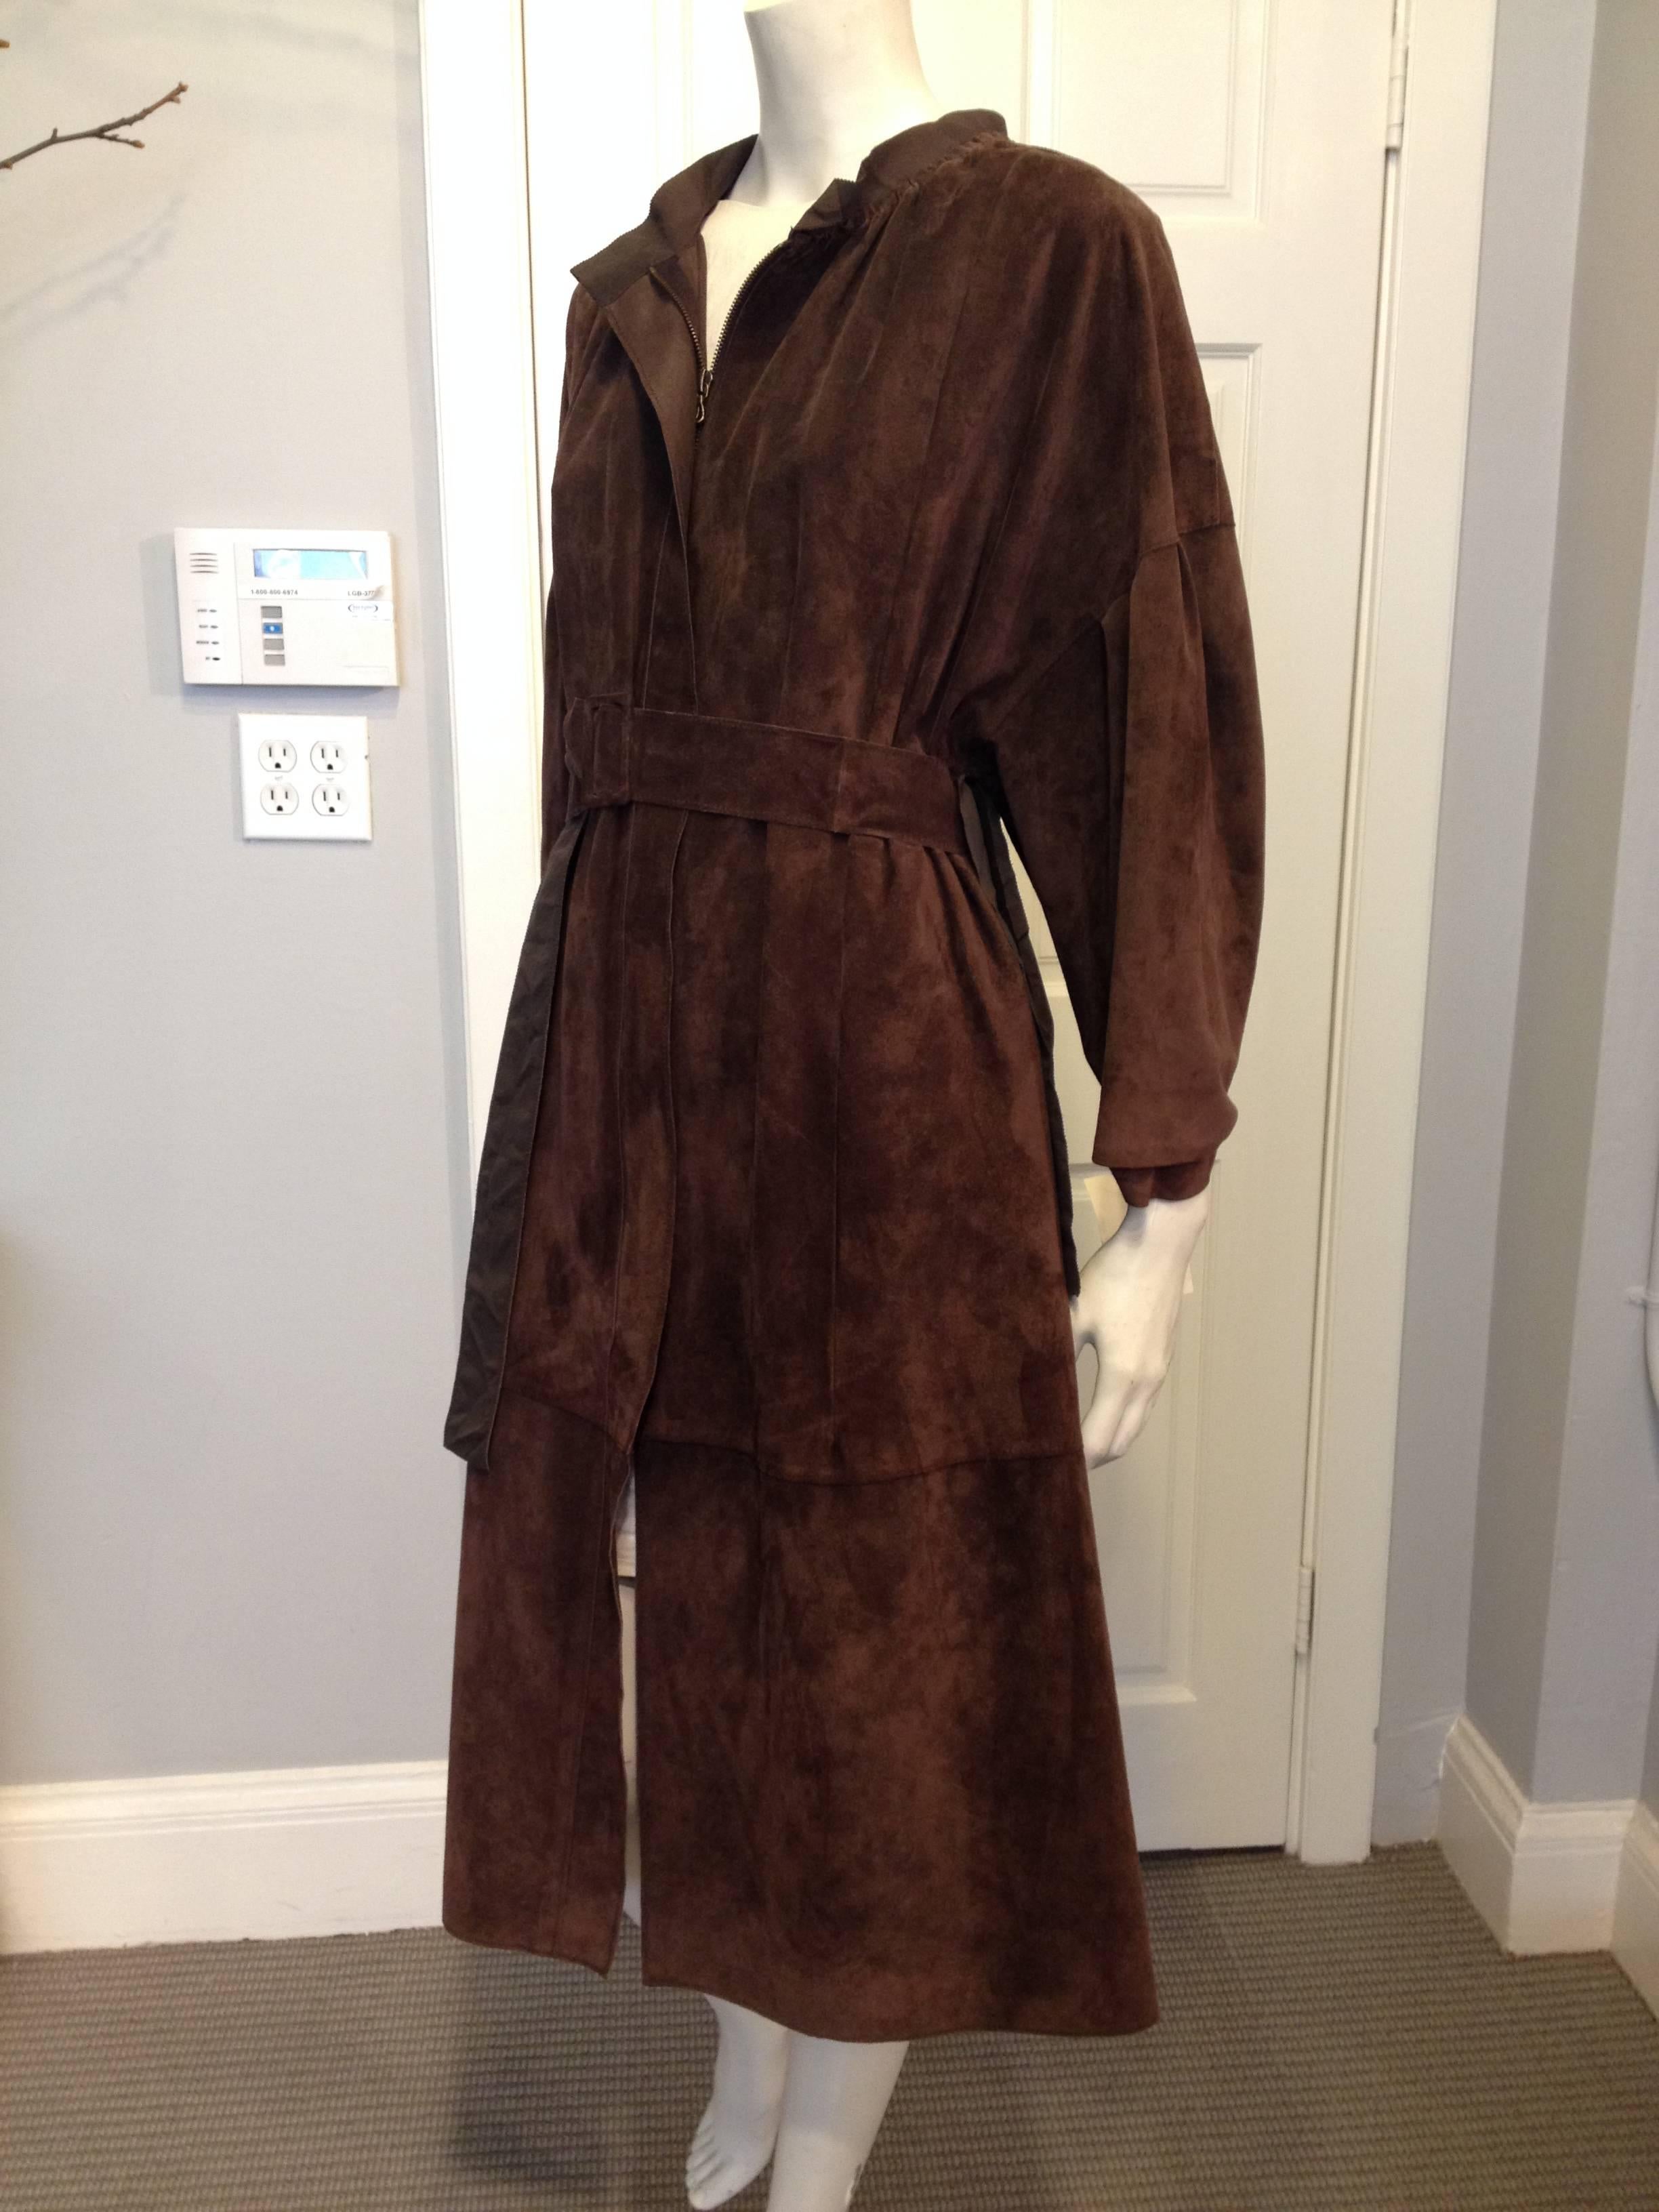 The beautiful and iconic draping distinctive to Lanvin looks wonderful in suede, especially such a lovely and luxurious soft velvety brown suede. The collar is lined with grosgrain, and the sleeves are cut voluminously and pleated but tapering to